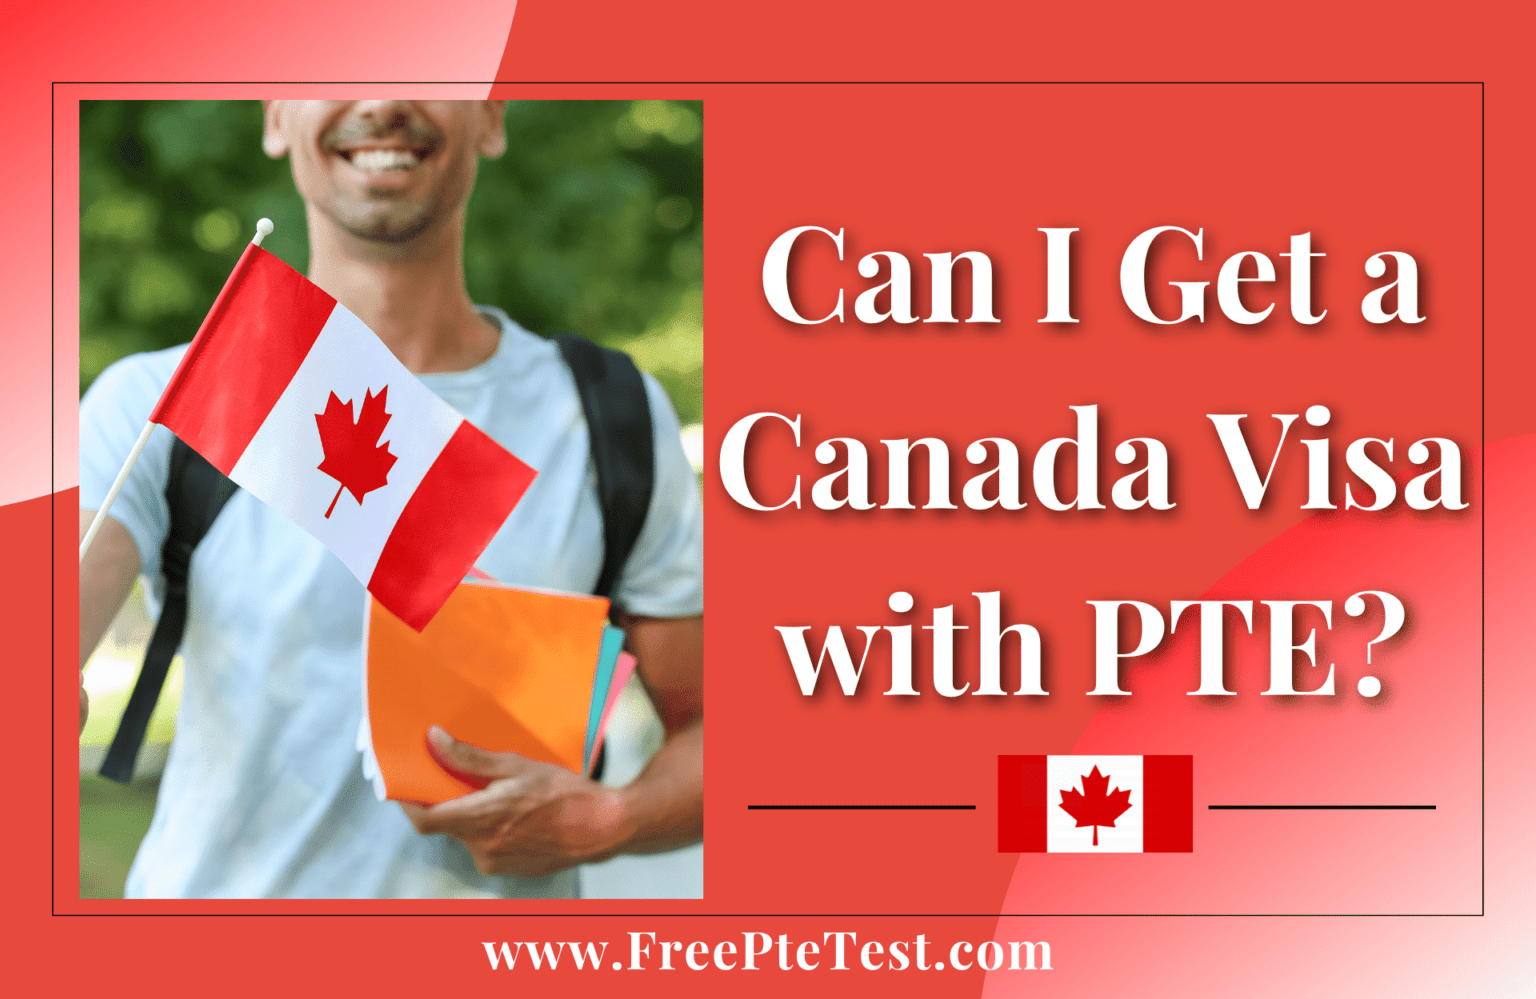 Can I Get a Canada Visa with PTE?